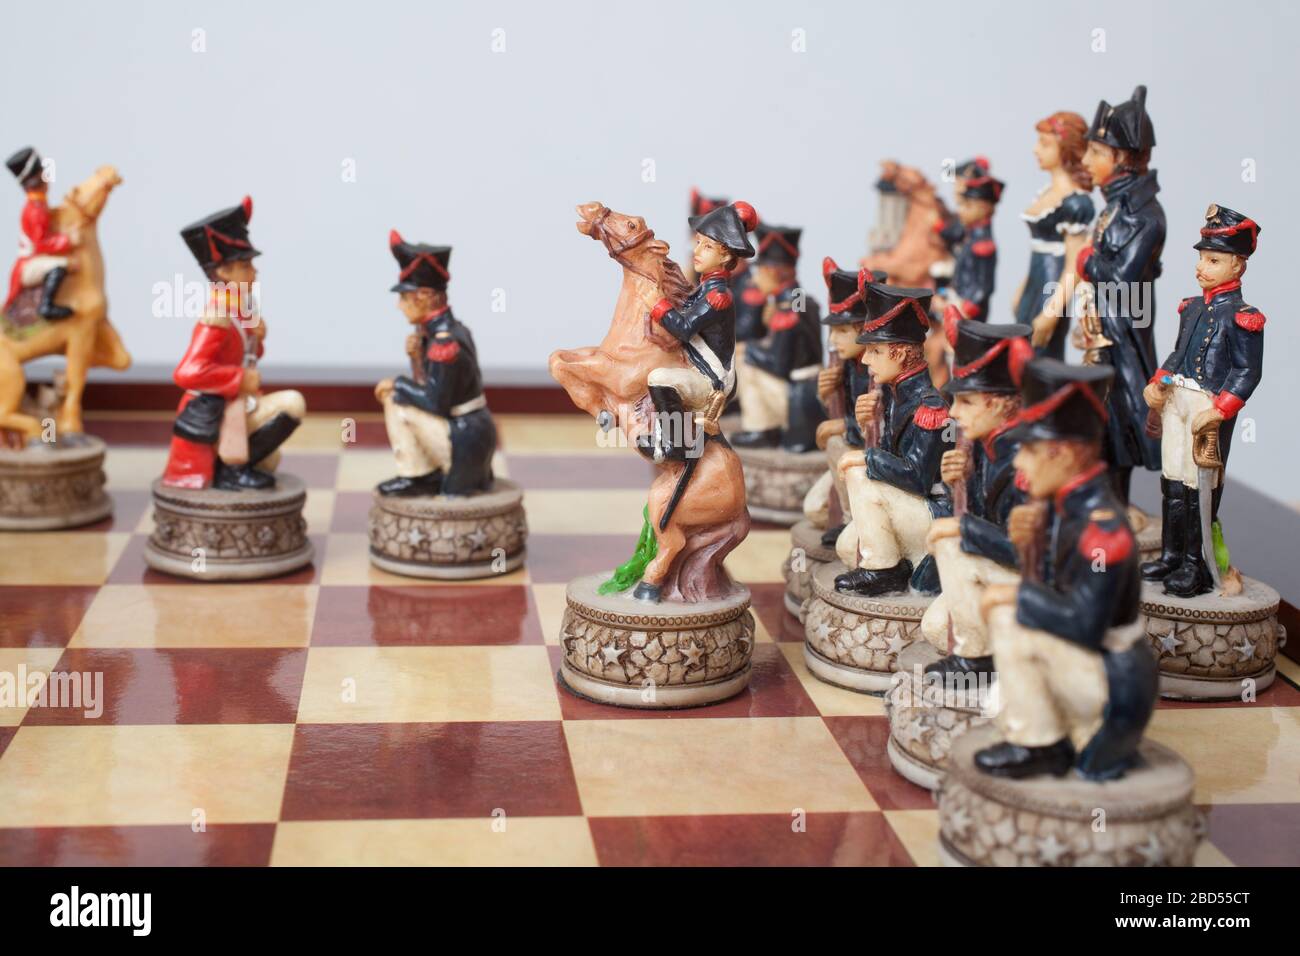 Four Chess Piece Knight on a Chess Board Stock Photo - Image of board,  army: 138703686